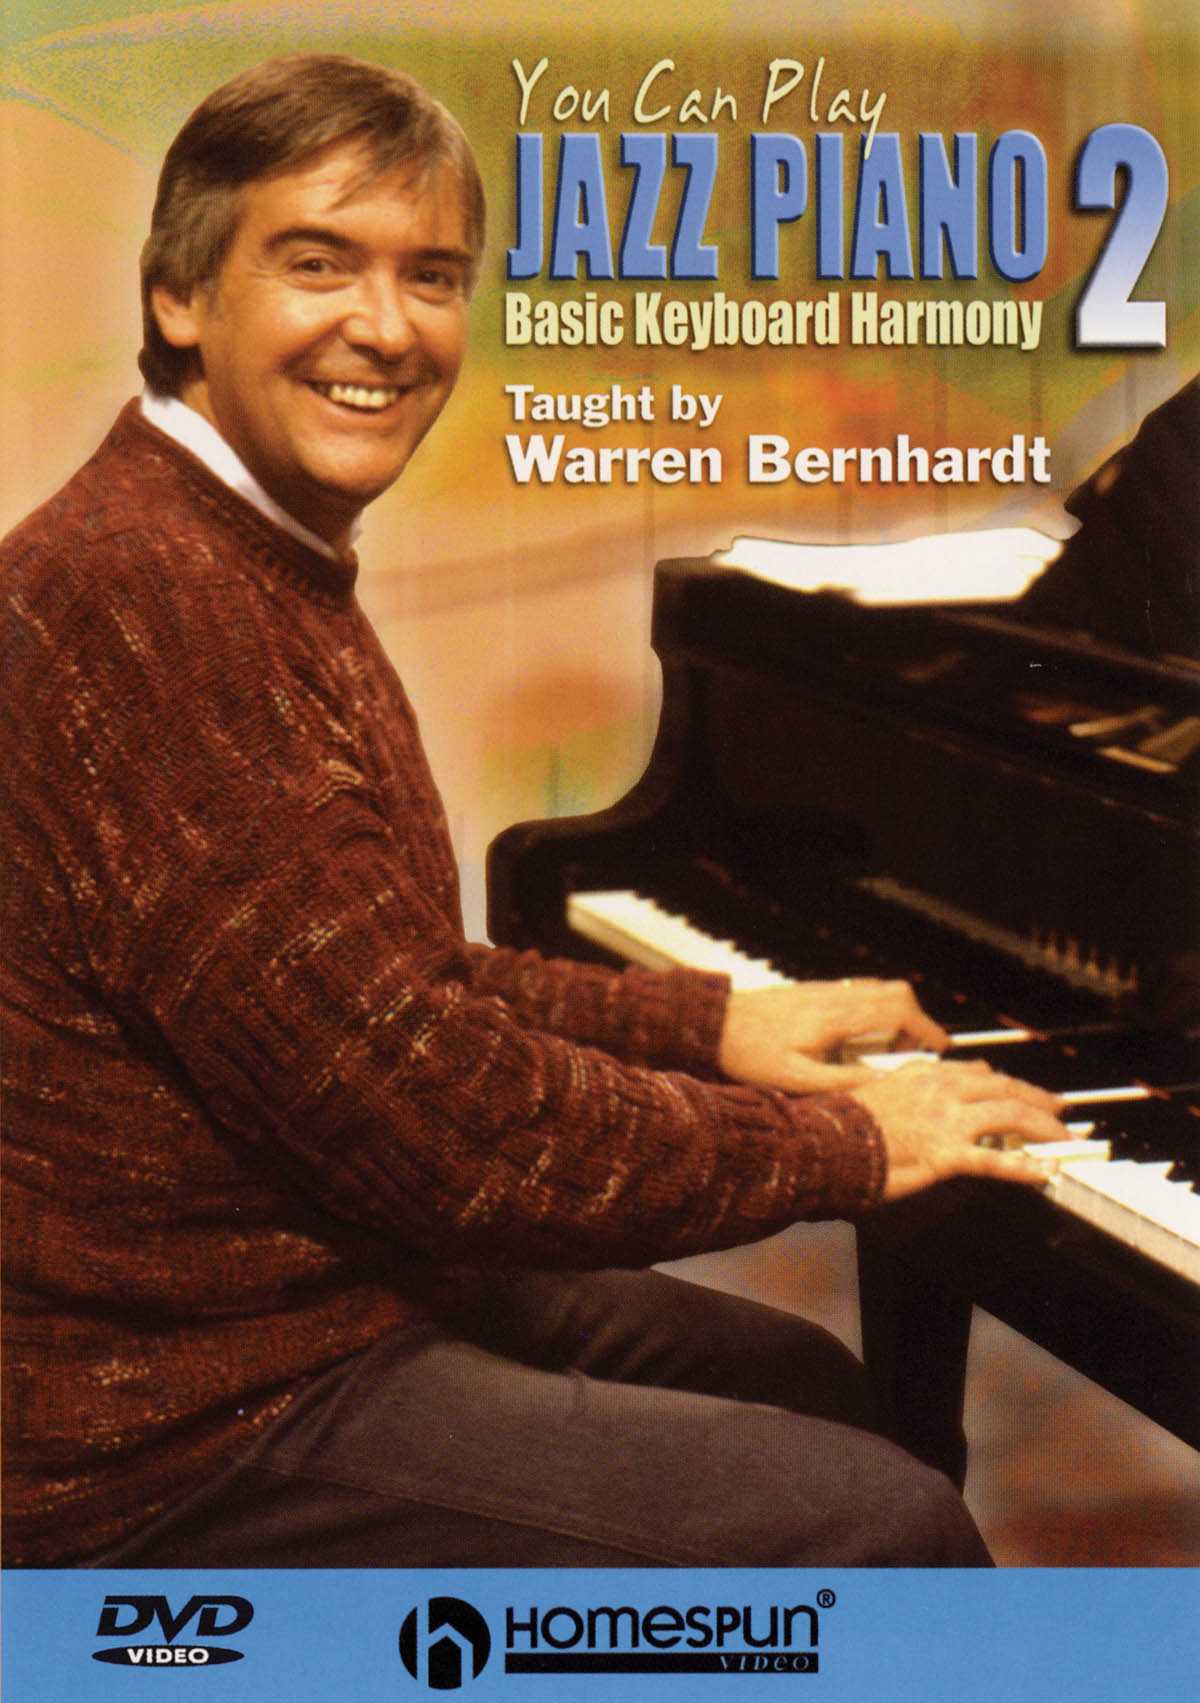 Image 1 of DVD - You Can Play Jazz Piano: Vol. 2 - Basic Keyboard Harmony - SKU# 300-DVD170 : Product Type Media : Elderly Instruments